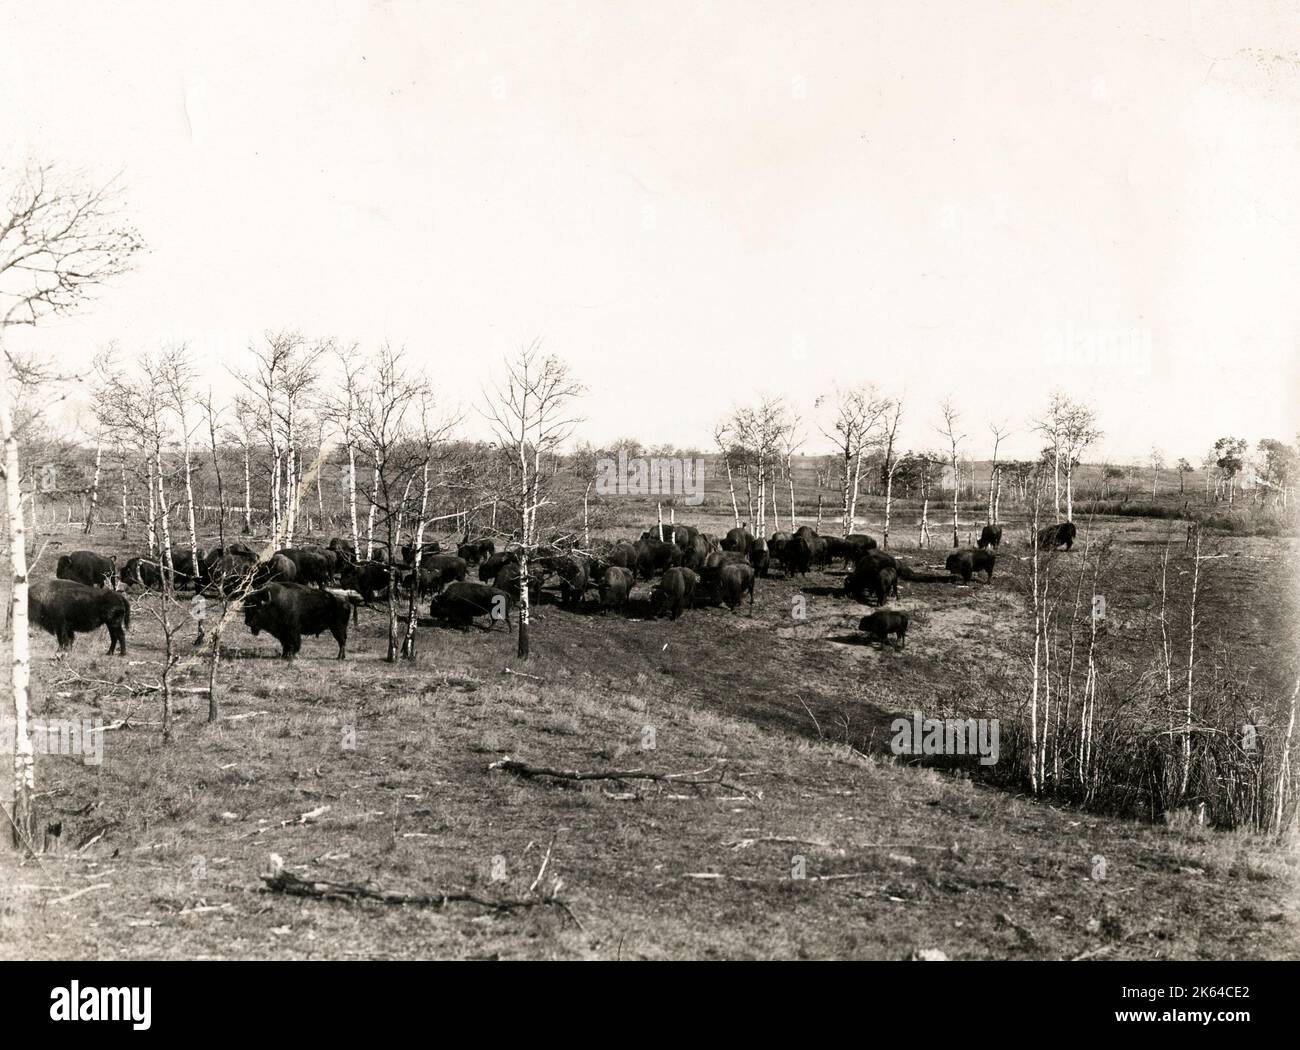 Buffalo herd in Buffalo National Park Canada, c.1920. Buffalo National Park was created near the town of Wainwright in east central Alberta on June 5, 1909. It was closed in 1940 and delisted in 1947 when the land was transferred to the Department of National Defence. The 583 km2 (225 sq mi) park land now comprises the majority of Canadian Forces Base Wainwright. The first Park Warden was Bud Cotton, who served from 1912 through 1940. Stock Photo